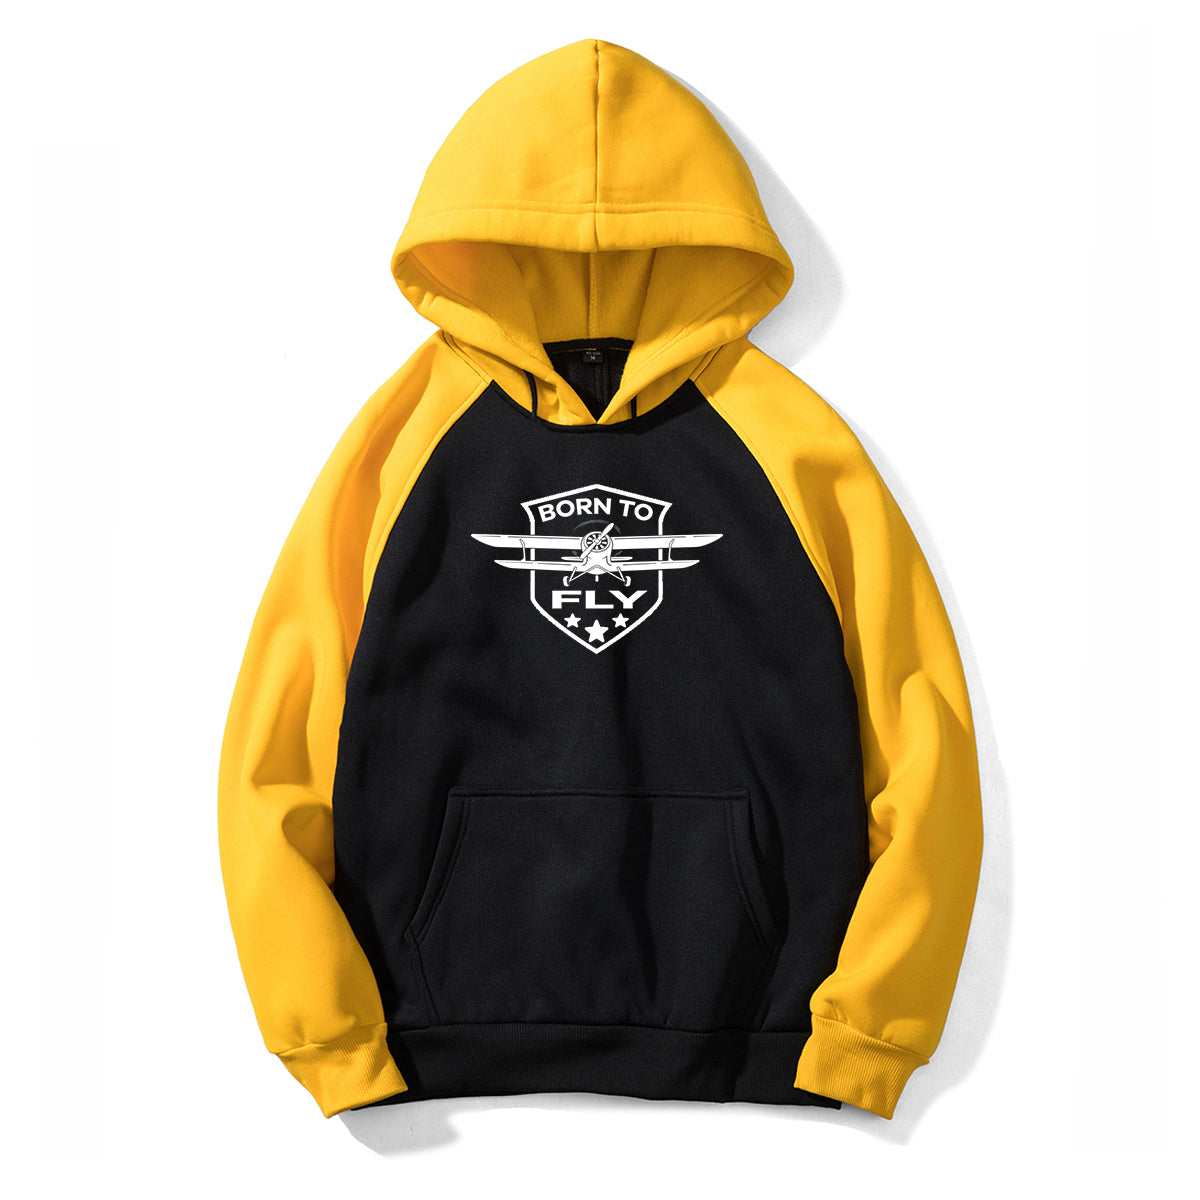 Born To Fly Designed Designed Colourful Hoodies